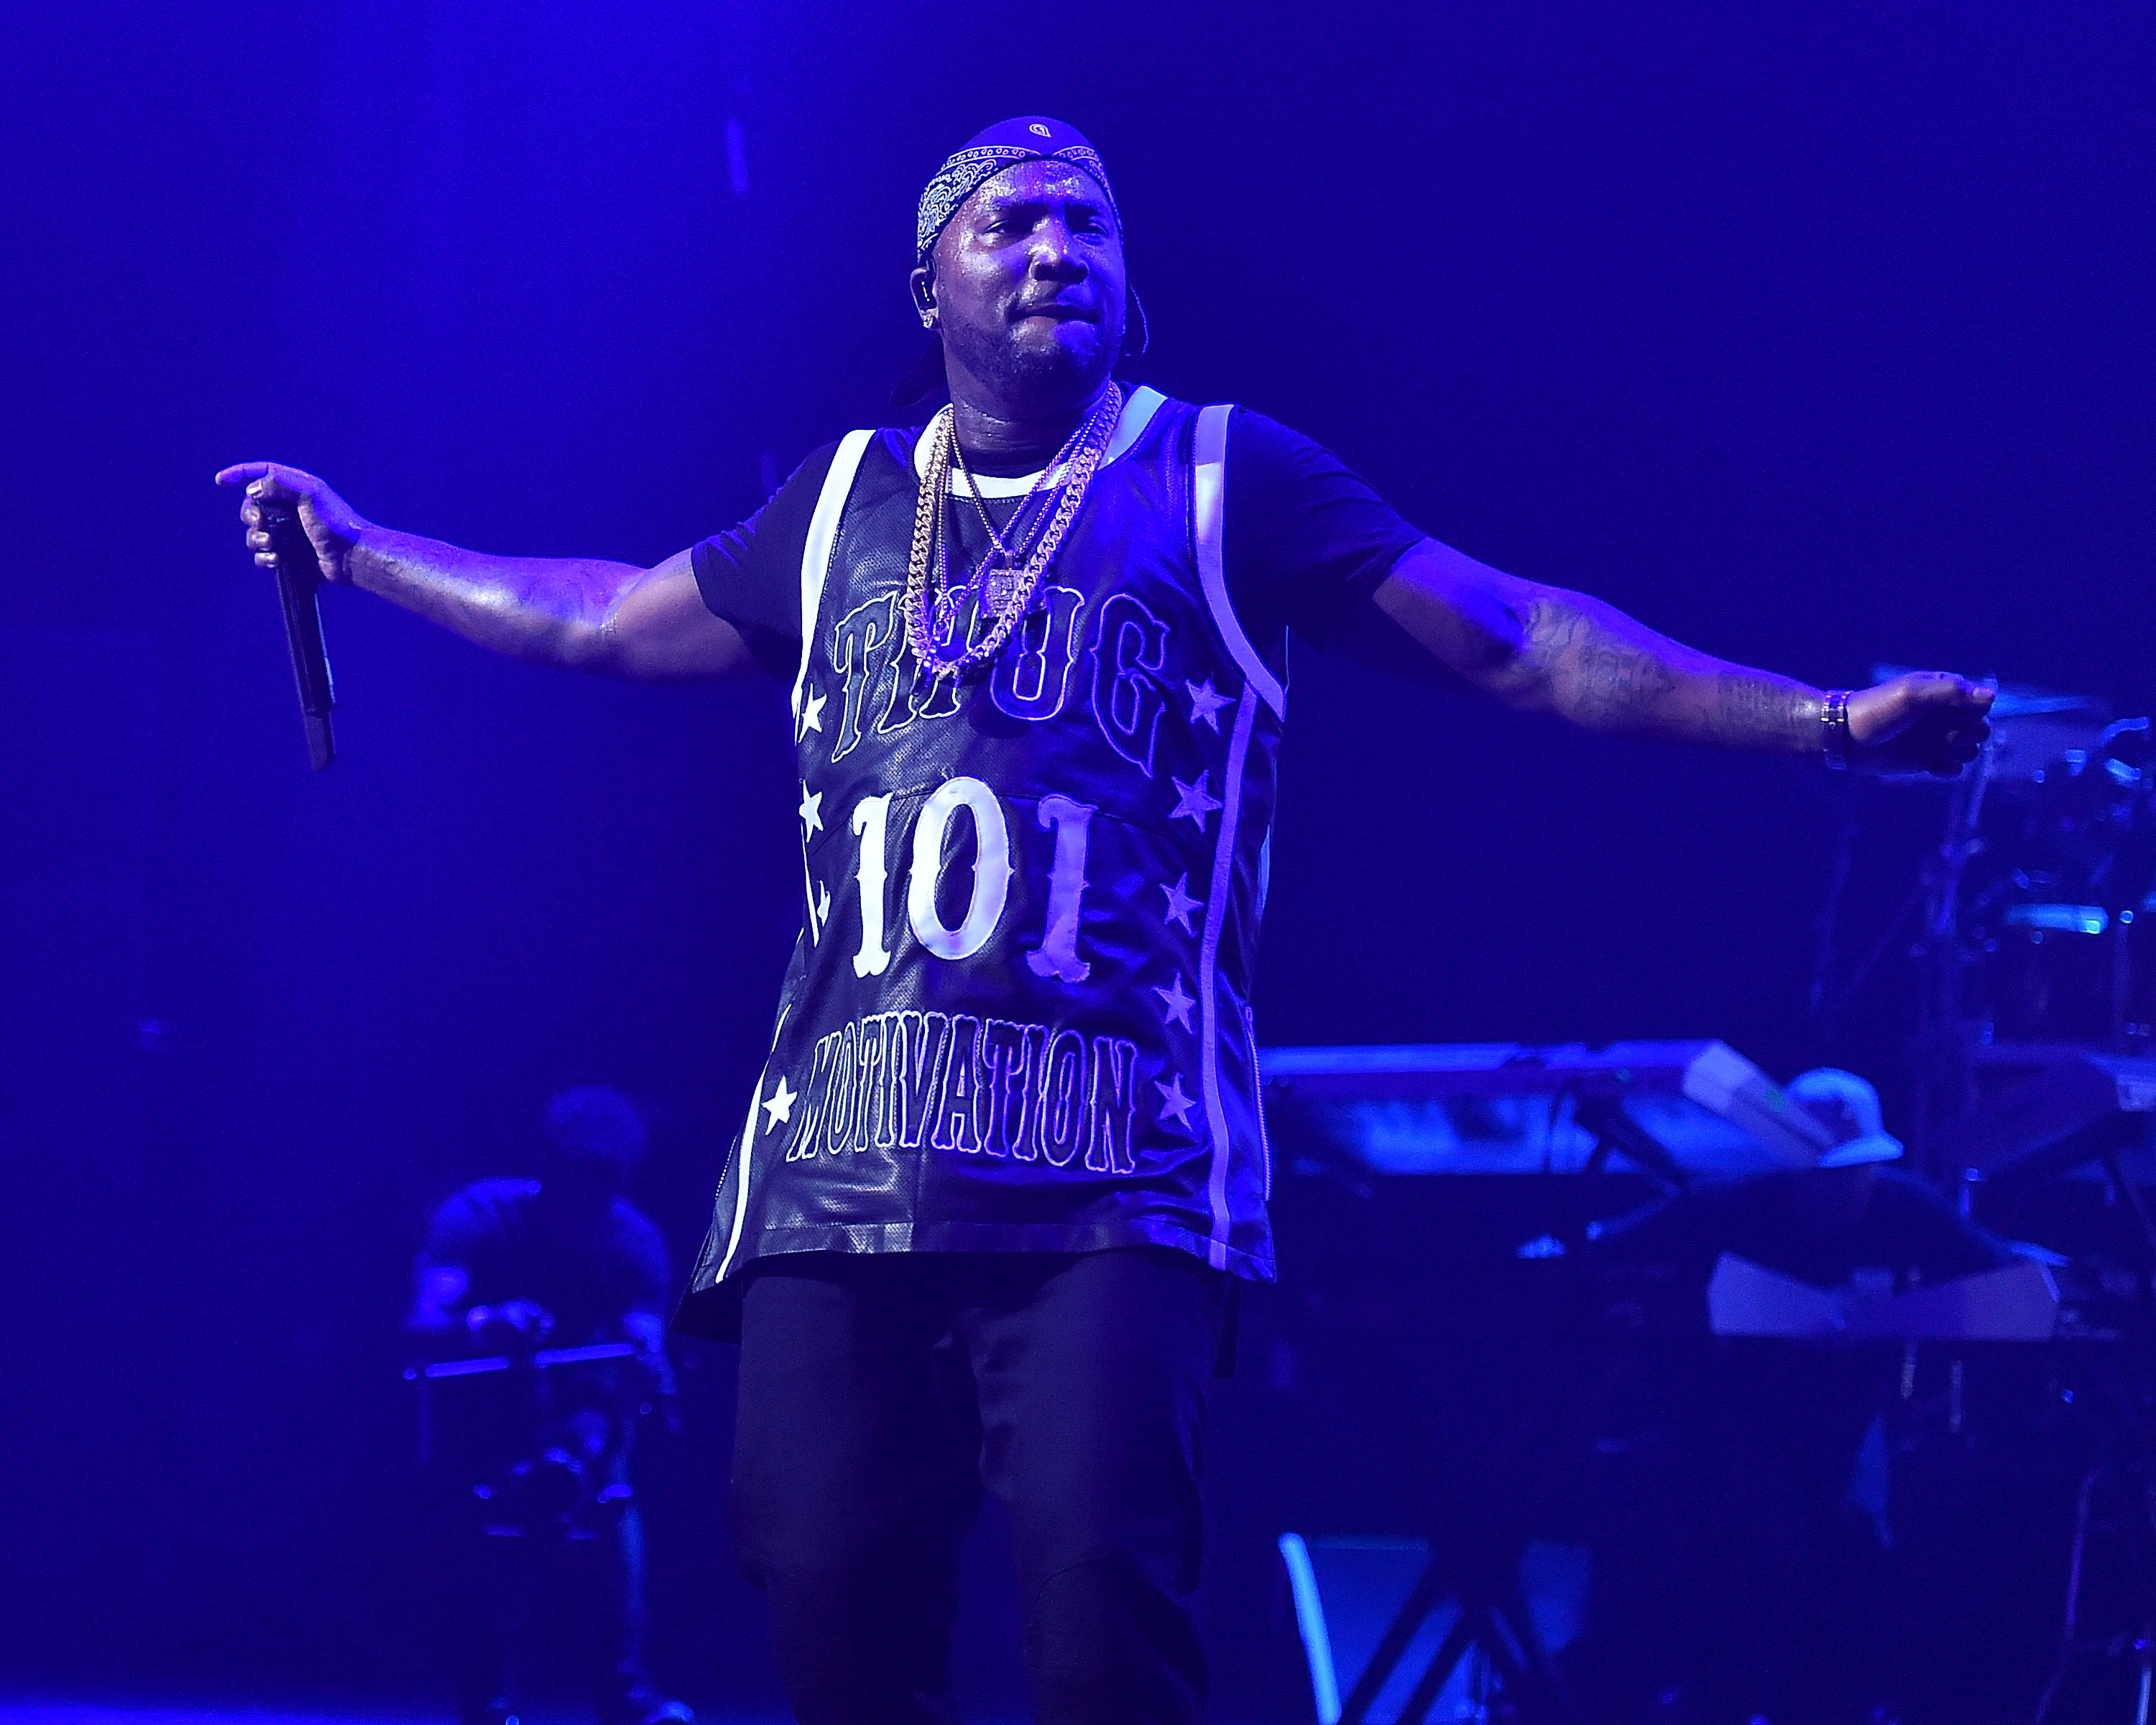 LIVE STREAM JEEZY ‘CHURCH IN THESE STREETS’ CONCERT NOW!! 93.9 WKYS